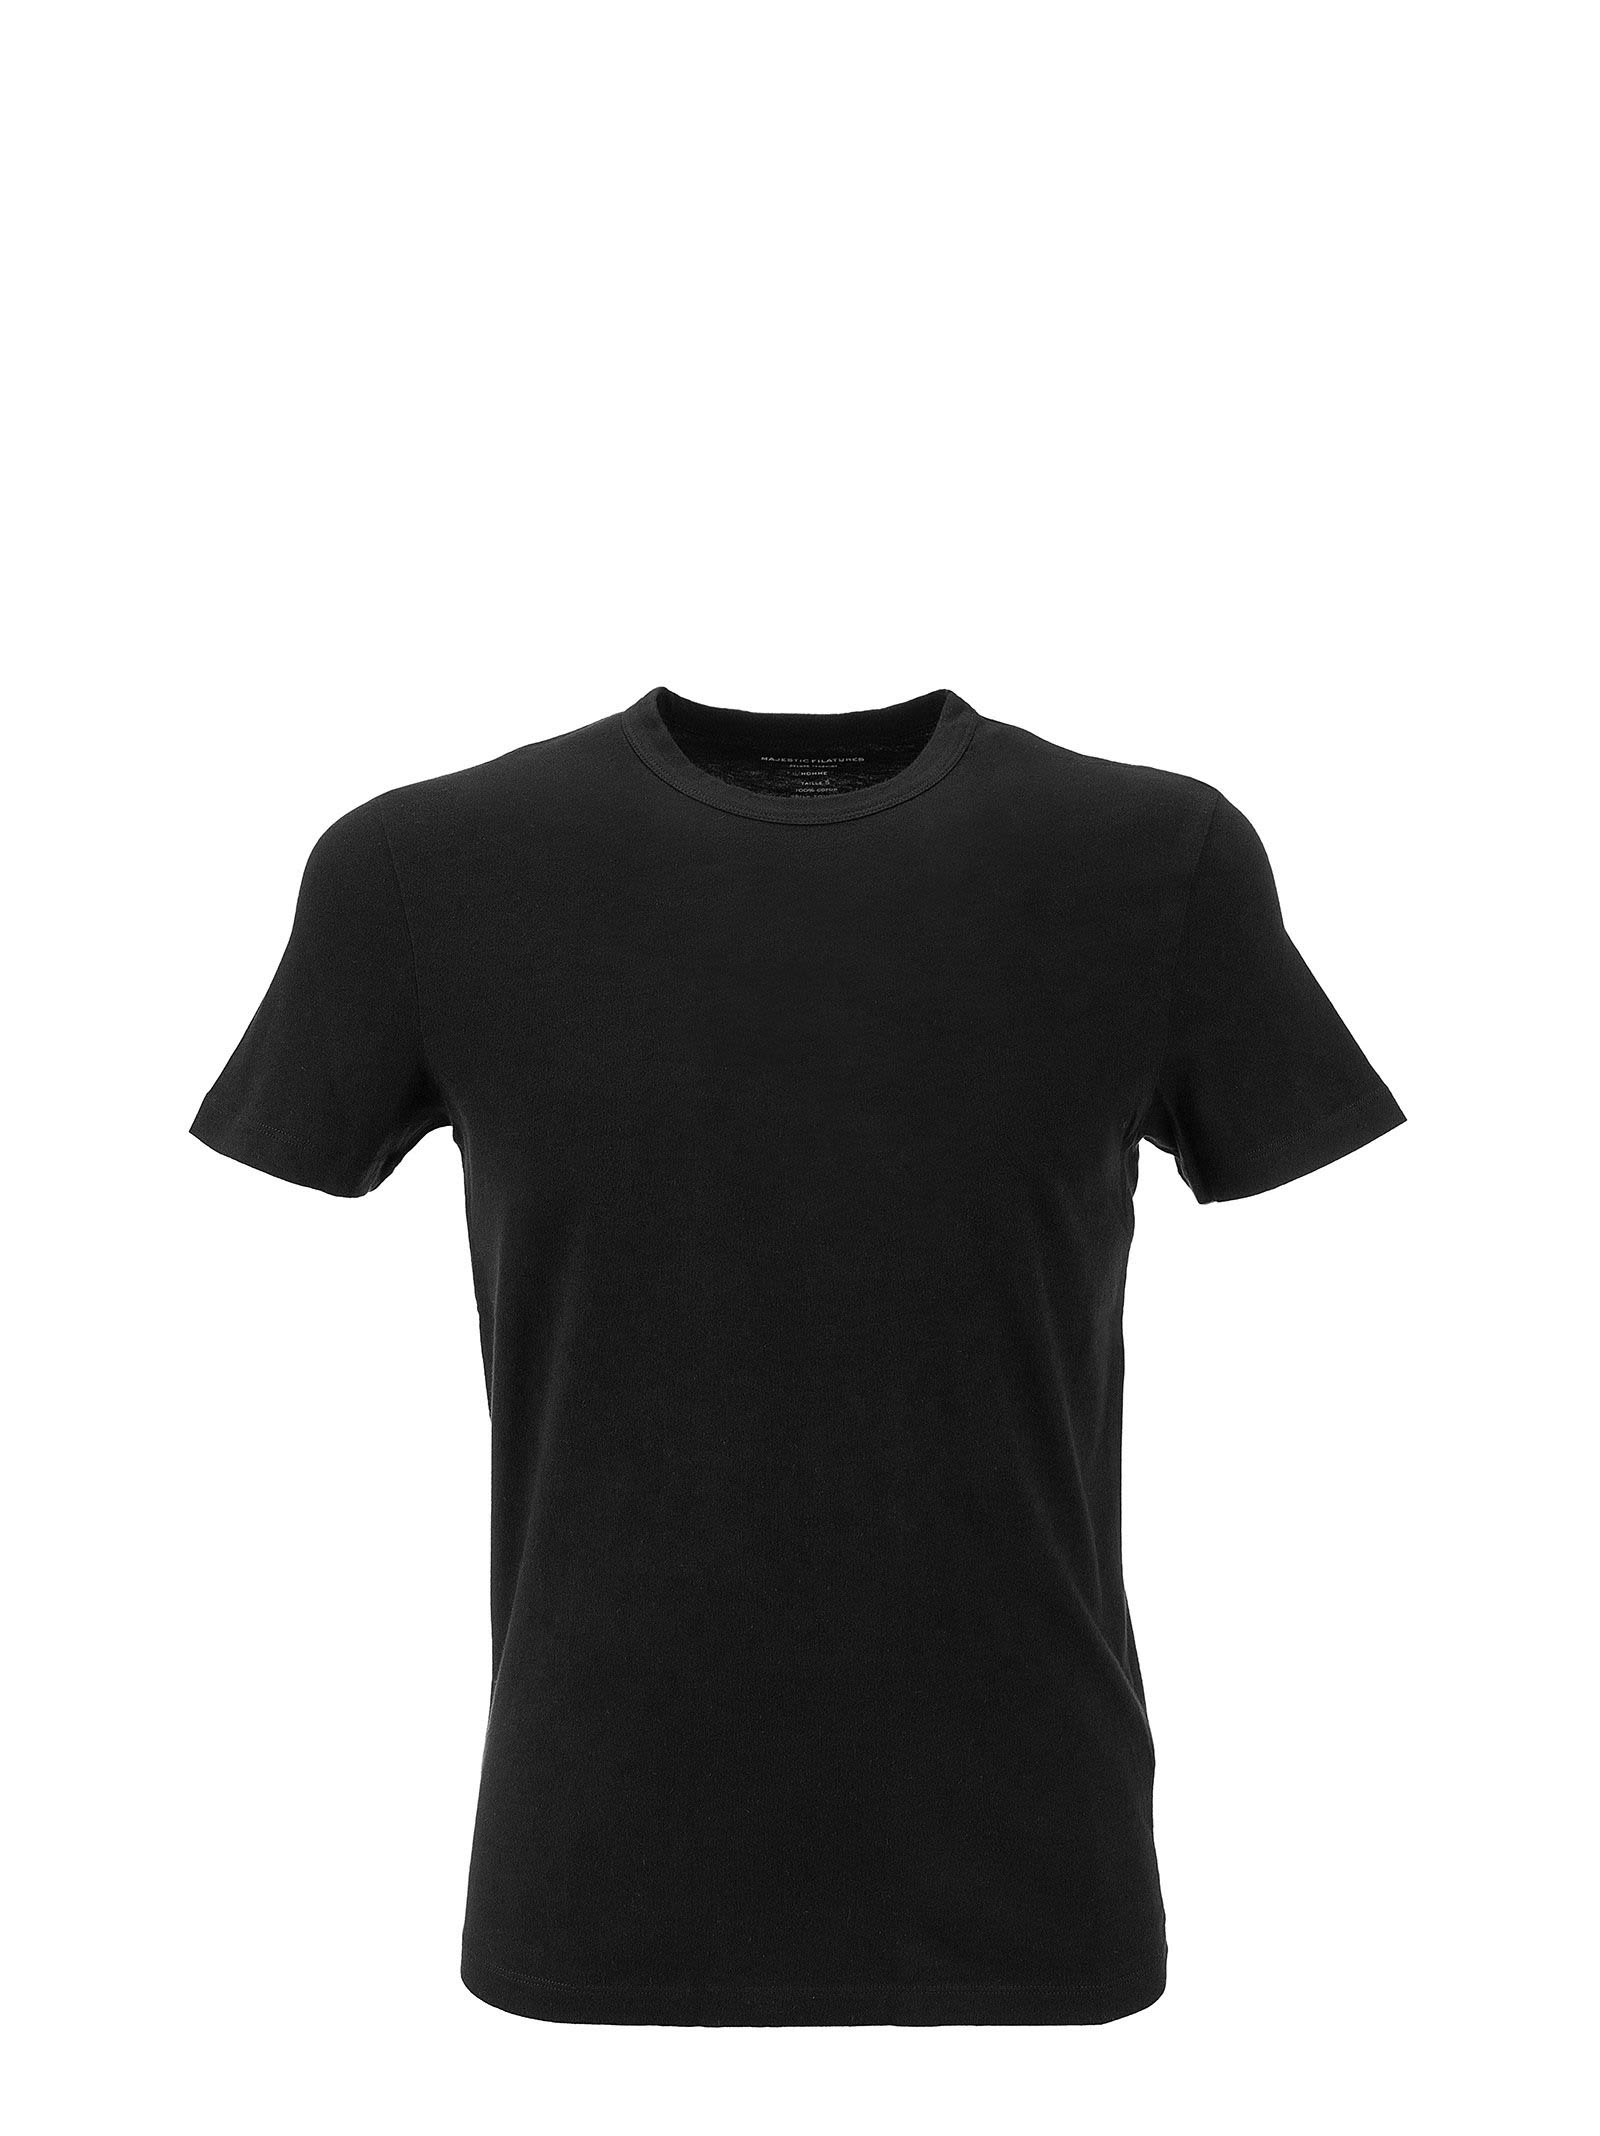 Majestic Filatures Black Crew Neck T-shirt In Silk Touch Cotton